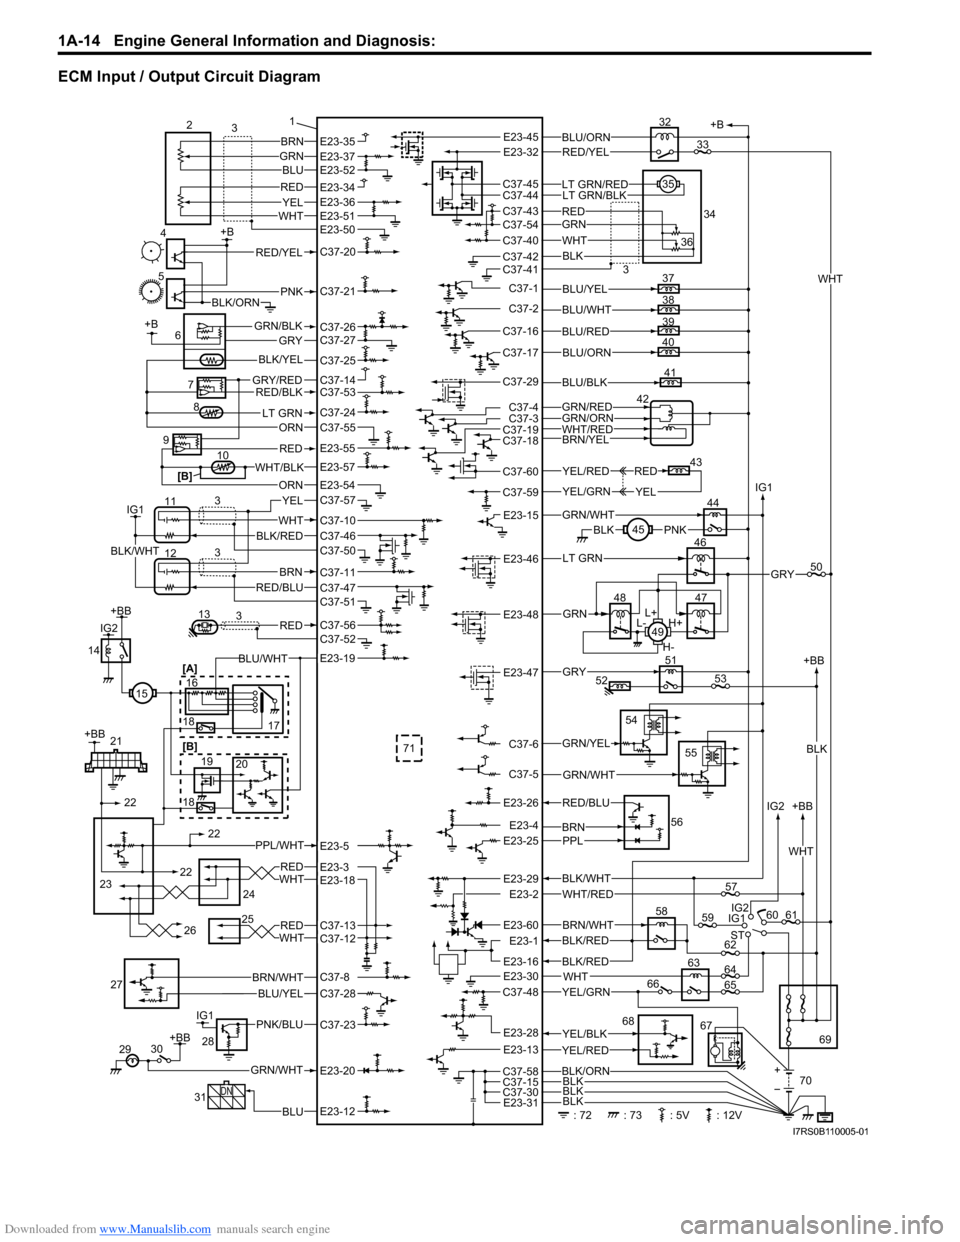 SUZUKI SWIFT 2005 2.G Service Workshop Manual Downloaded from www.Manualslib.com manuals search engine 1A-14 Engine General Information and Diagnosis: 
ECM Input / Output Circuit Diagram
+B
58
IG1 +BB
ST IG2 IG2
60 61
69
BLK/WHT
WHT/RED
BRN/WHTBL